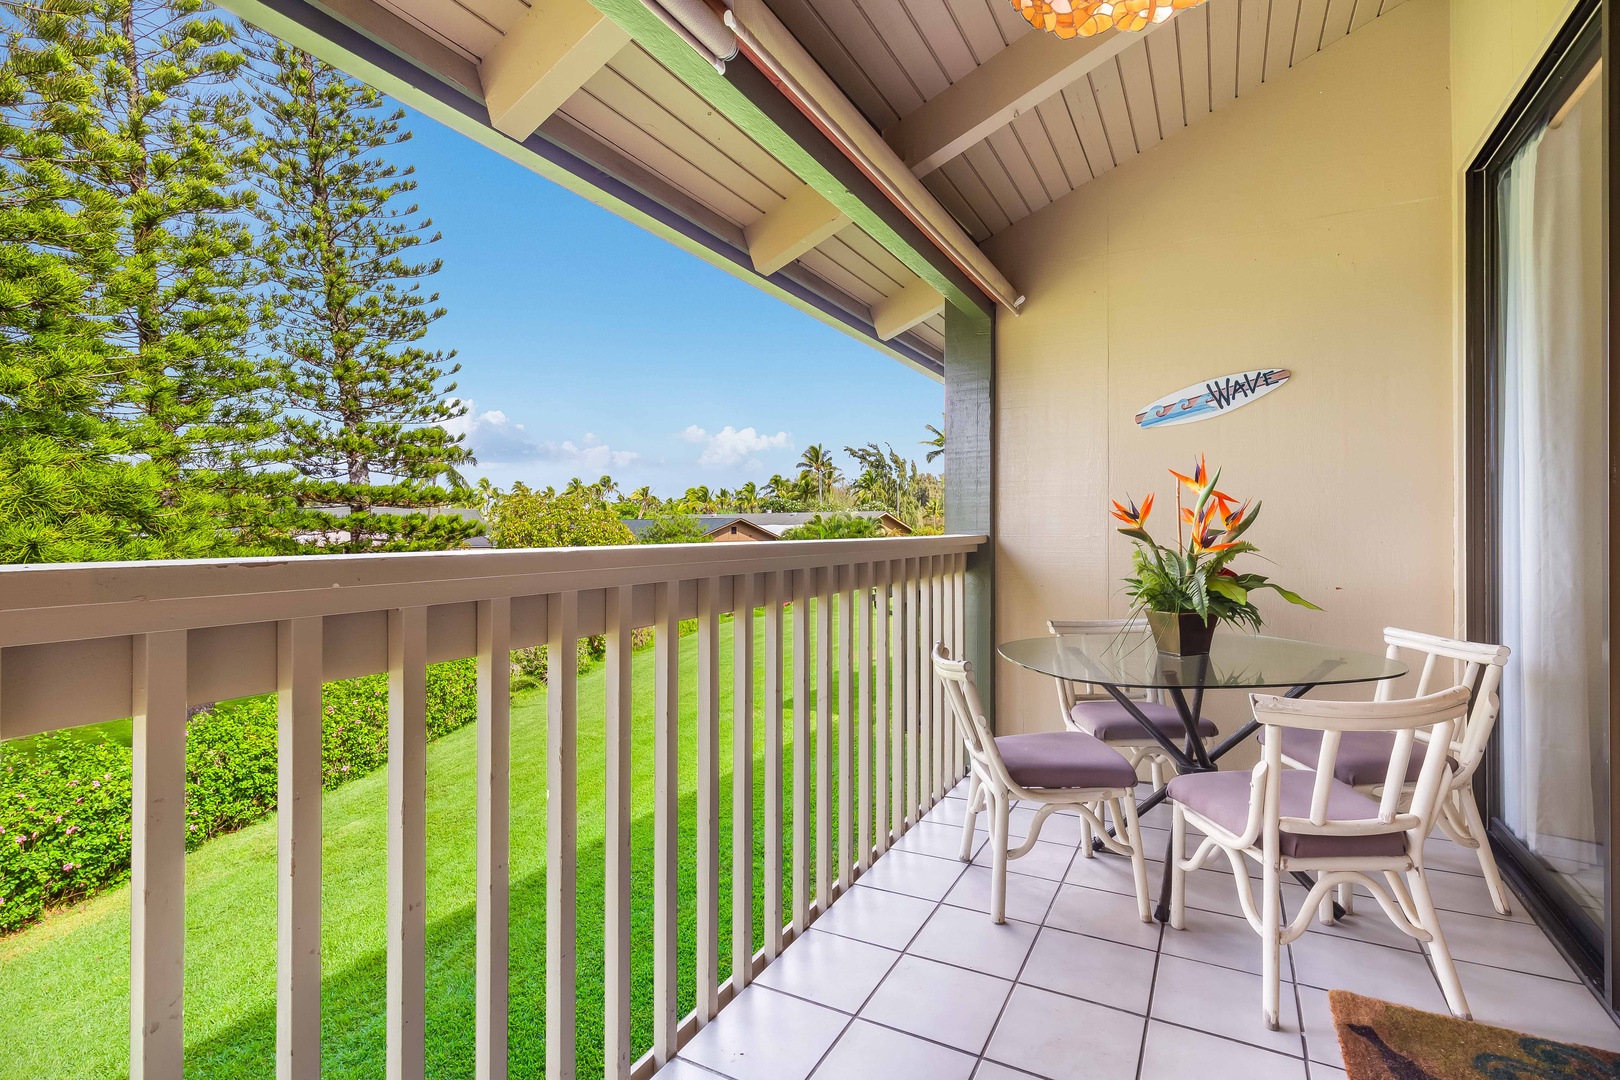 Kahuku Vacation Rentals, Ilima West Kuilima Estates #18 at Turtle Bay - Experience tranquility as you unwind on the spacious balcony, basking in the stunning vistas.